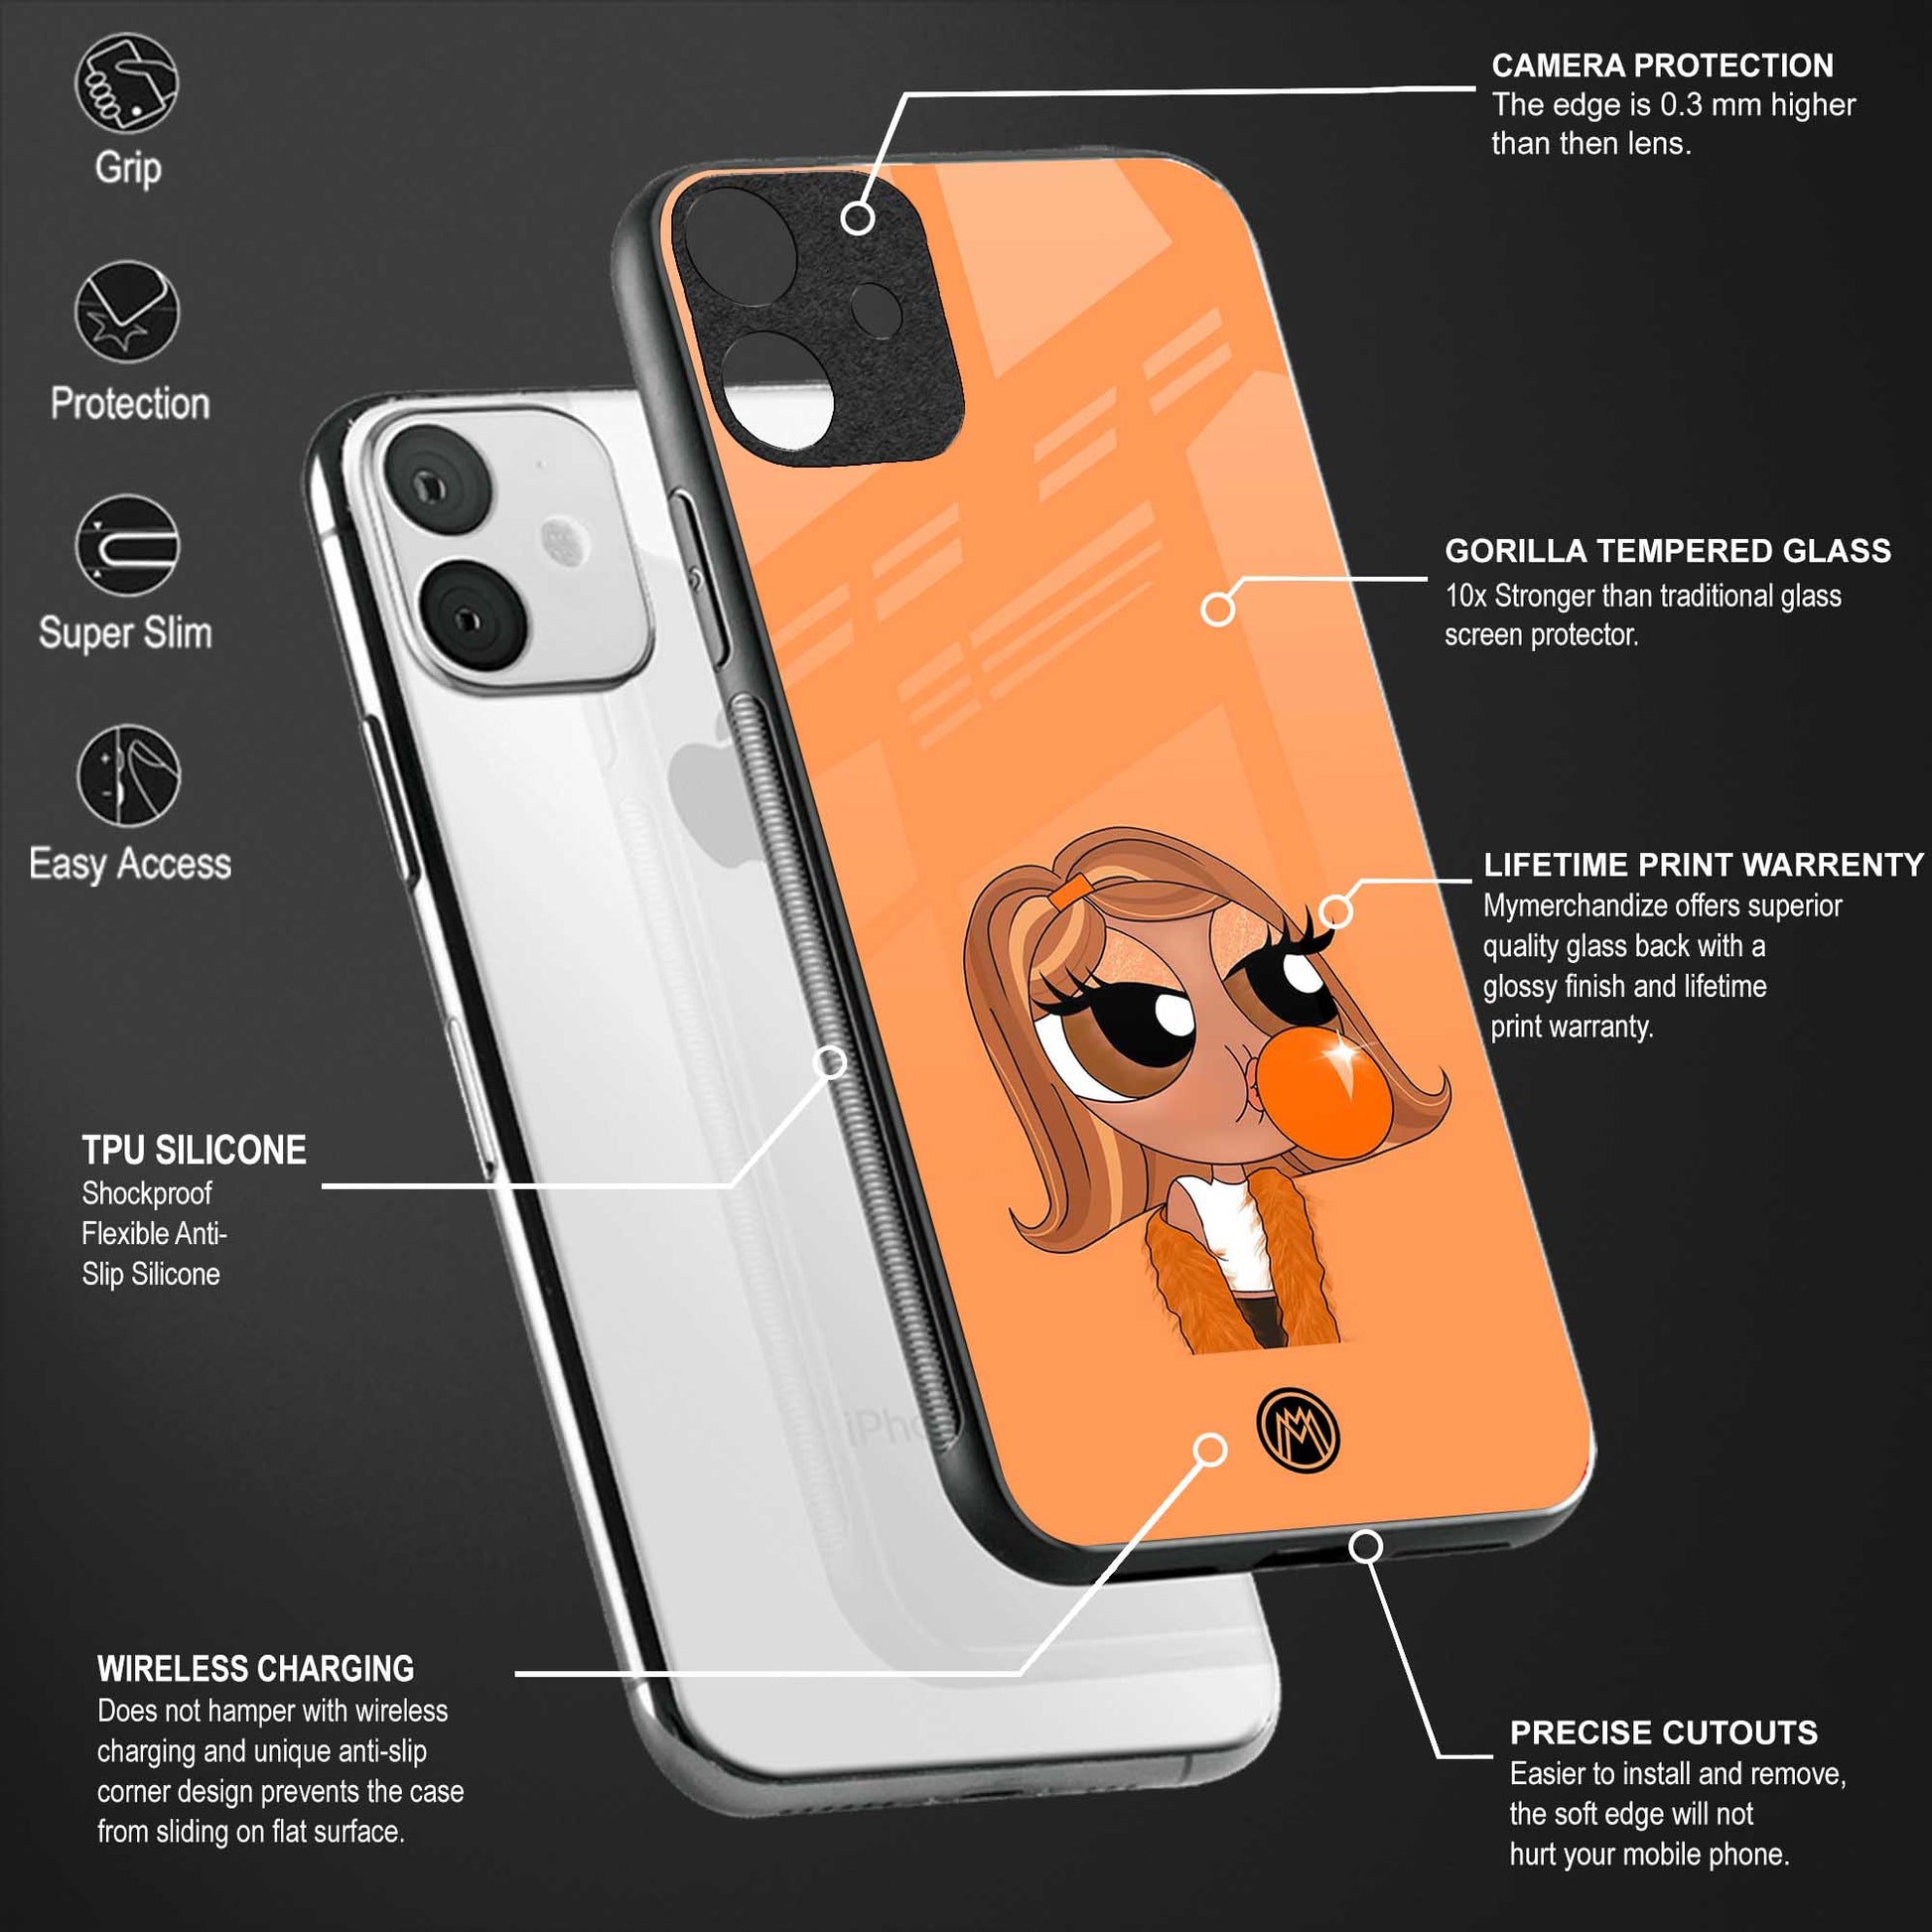 orange tote powerpuff girl back phone cover | glass case for google pixel 6a